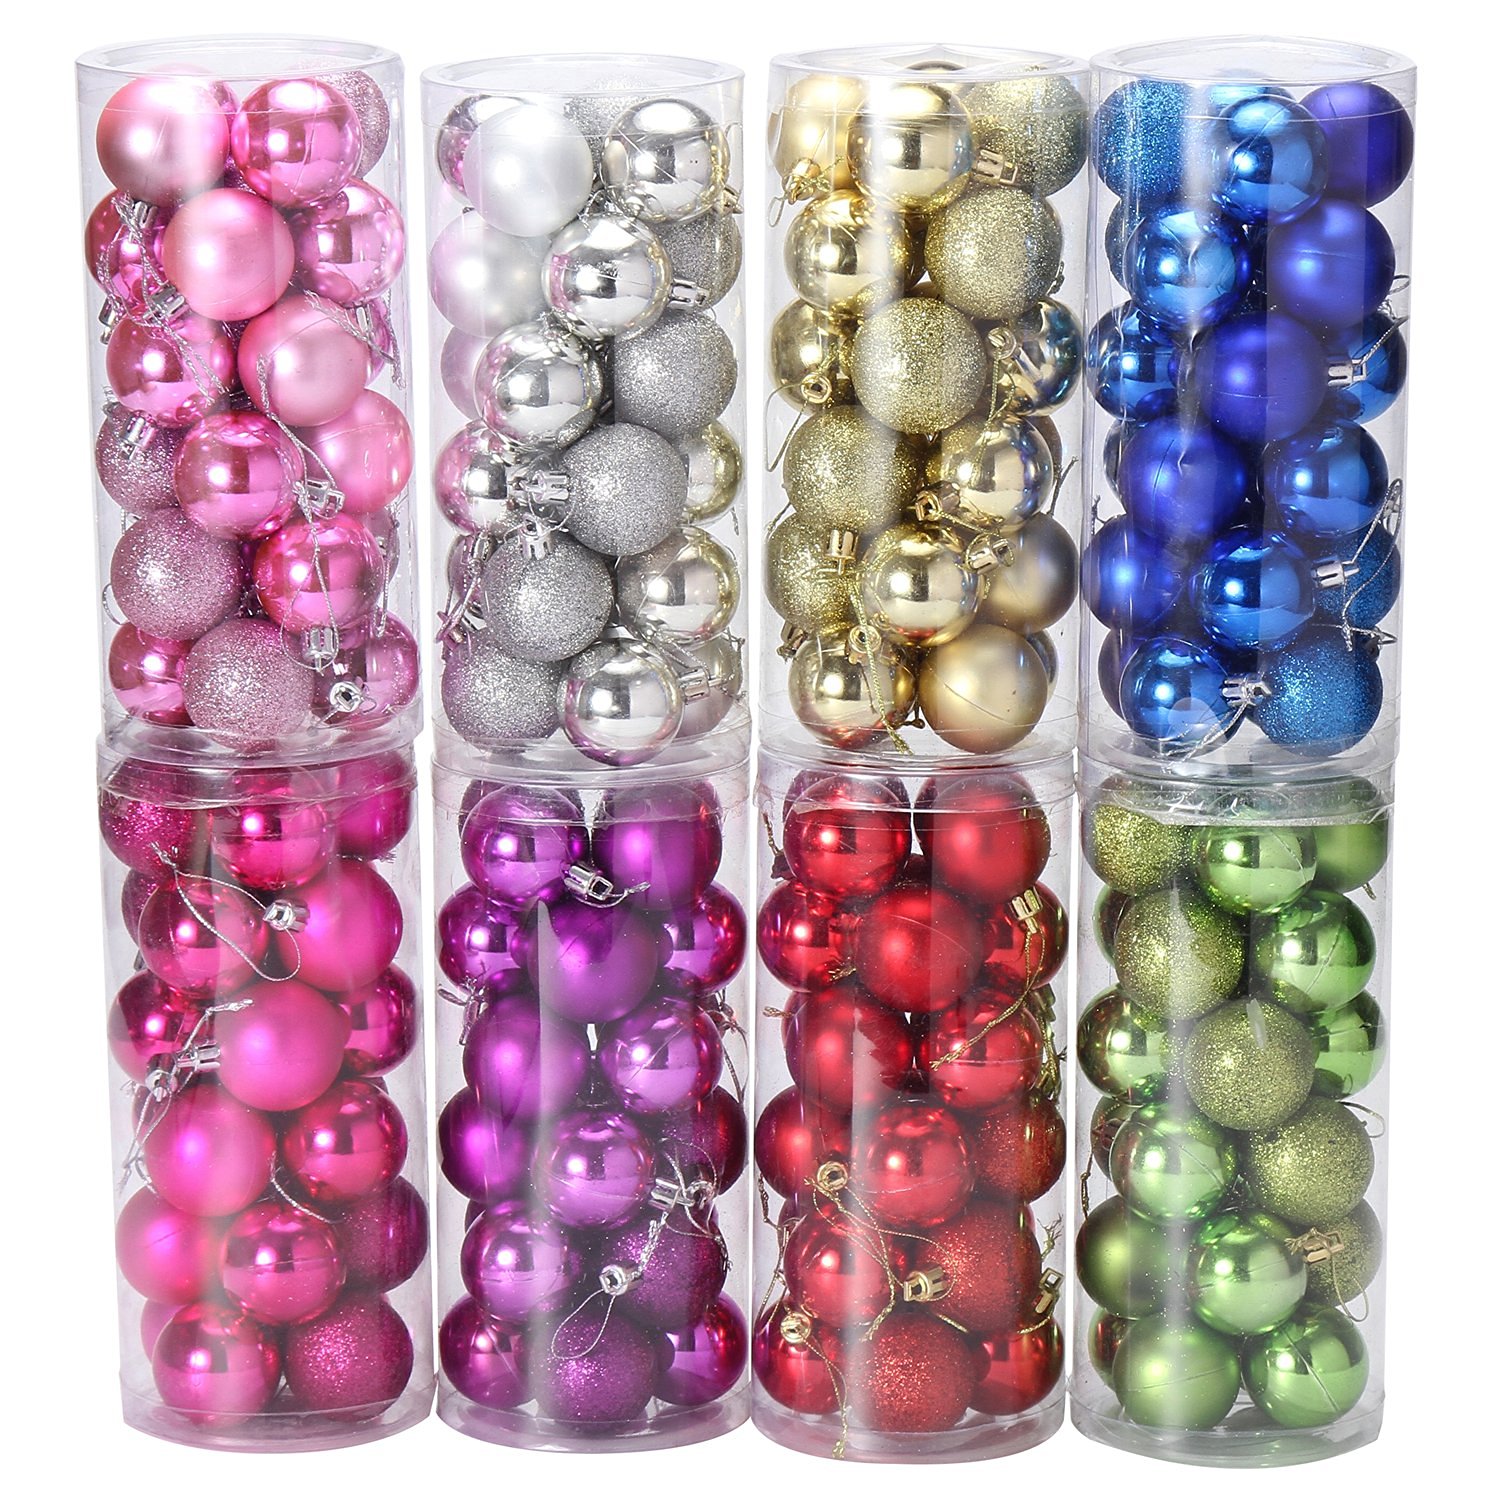 Use this set of Christmas tree balls to decorated a 